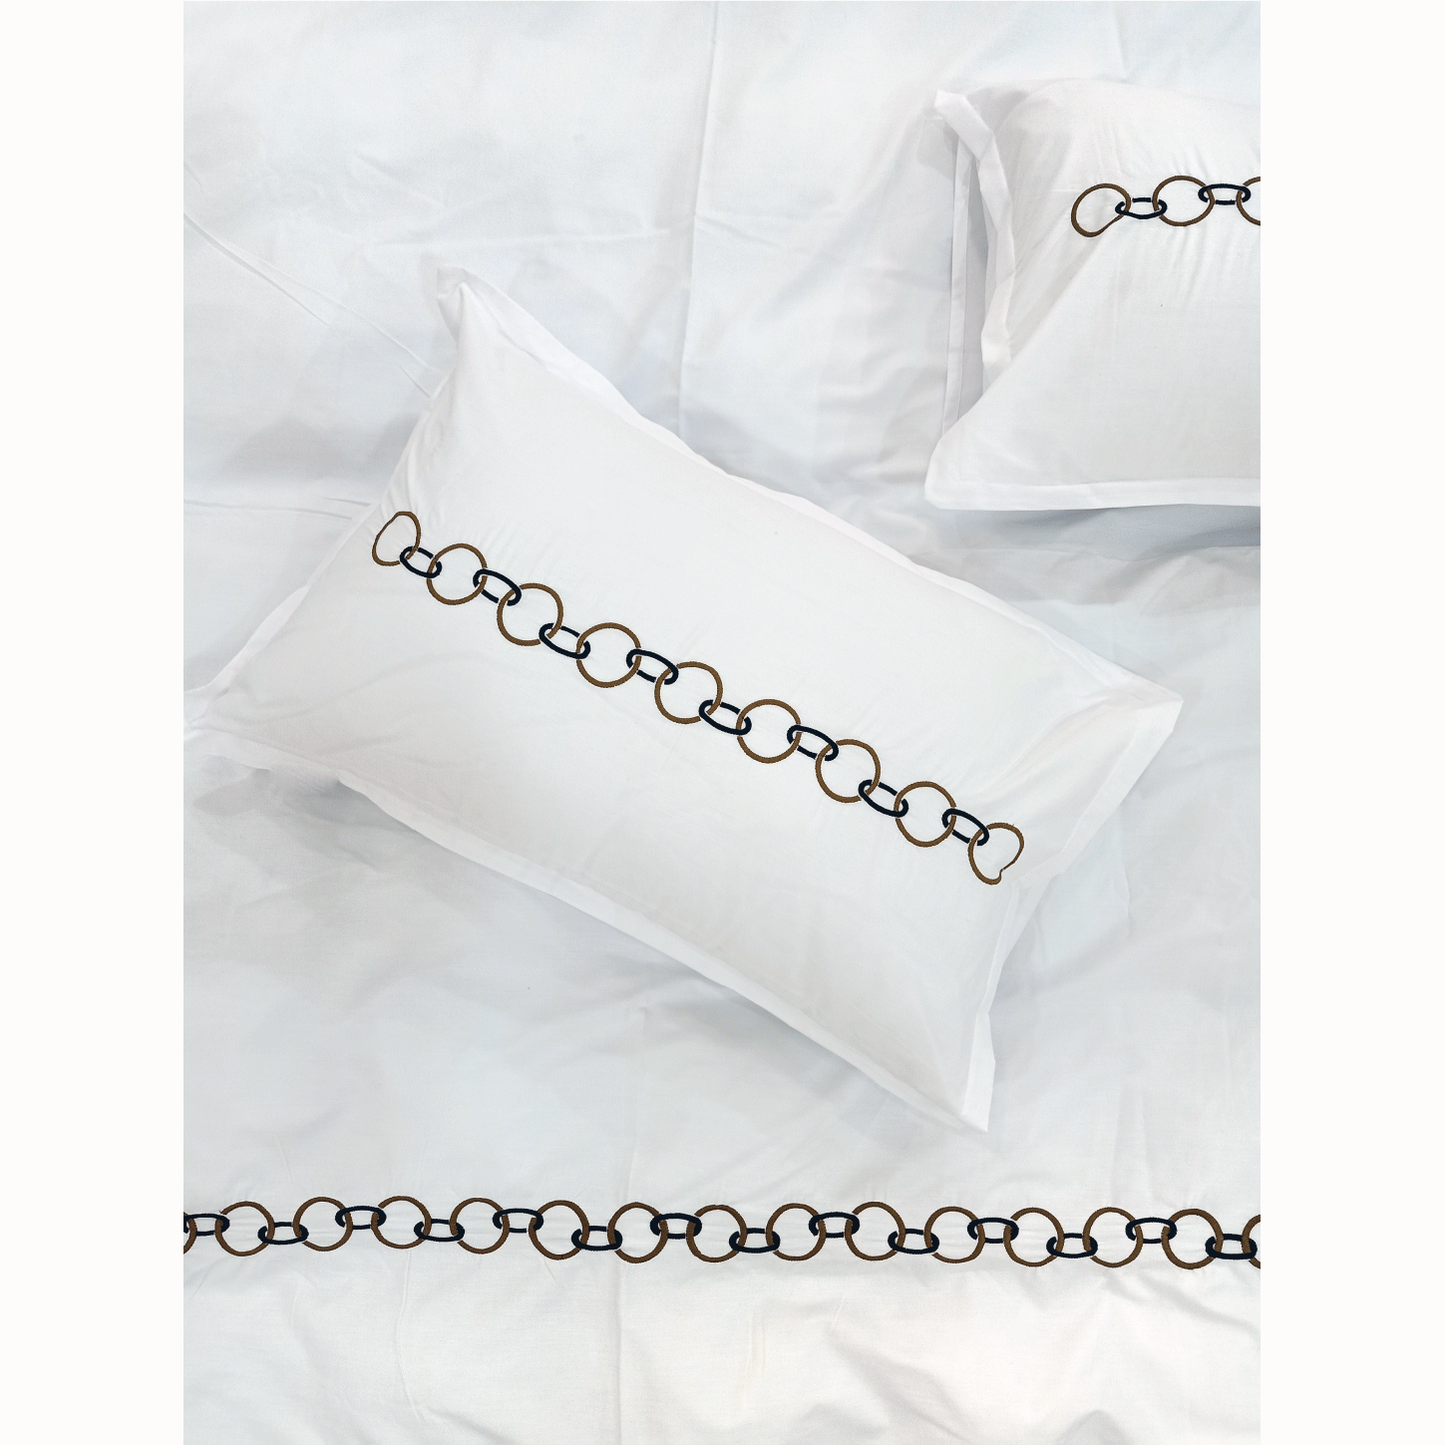 White Embroidered Duvet Cover Cotton 250tc Percale and 2 Pillowcases - Multiple Sizes - BD338